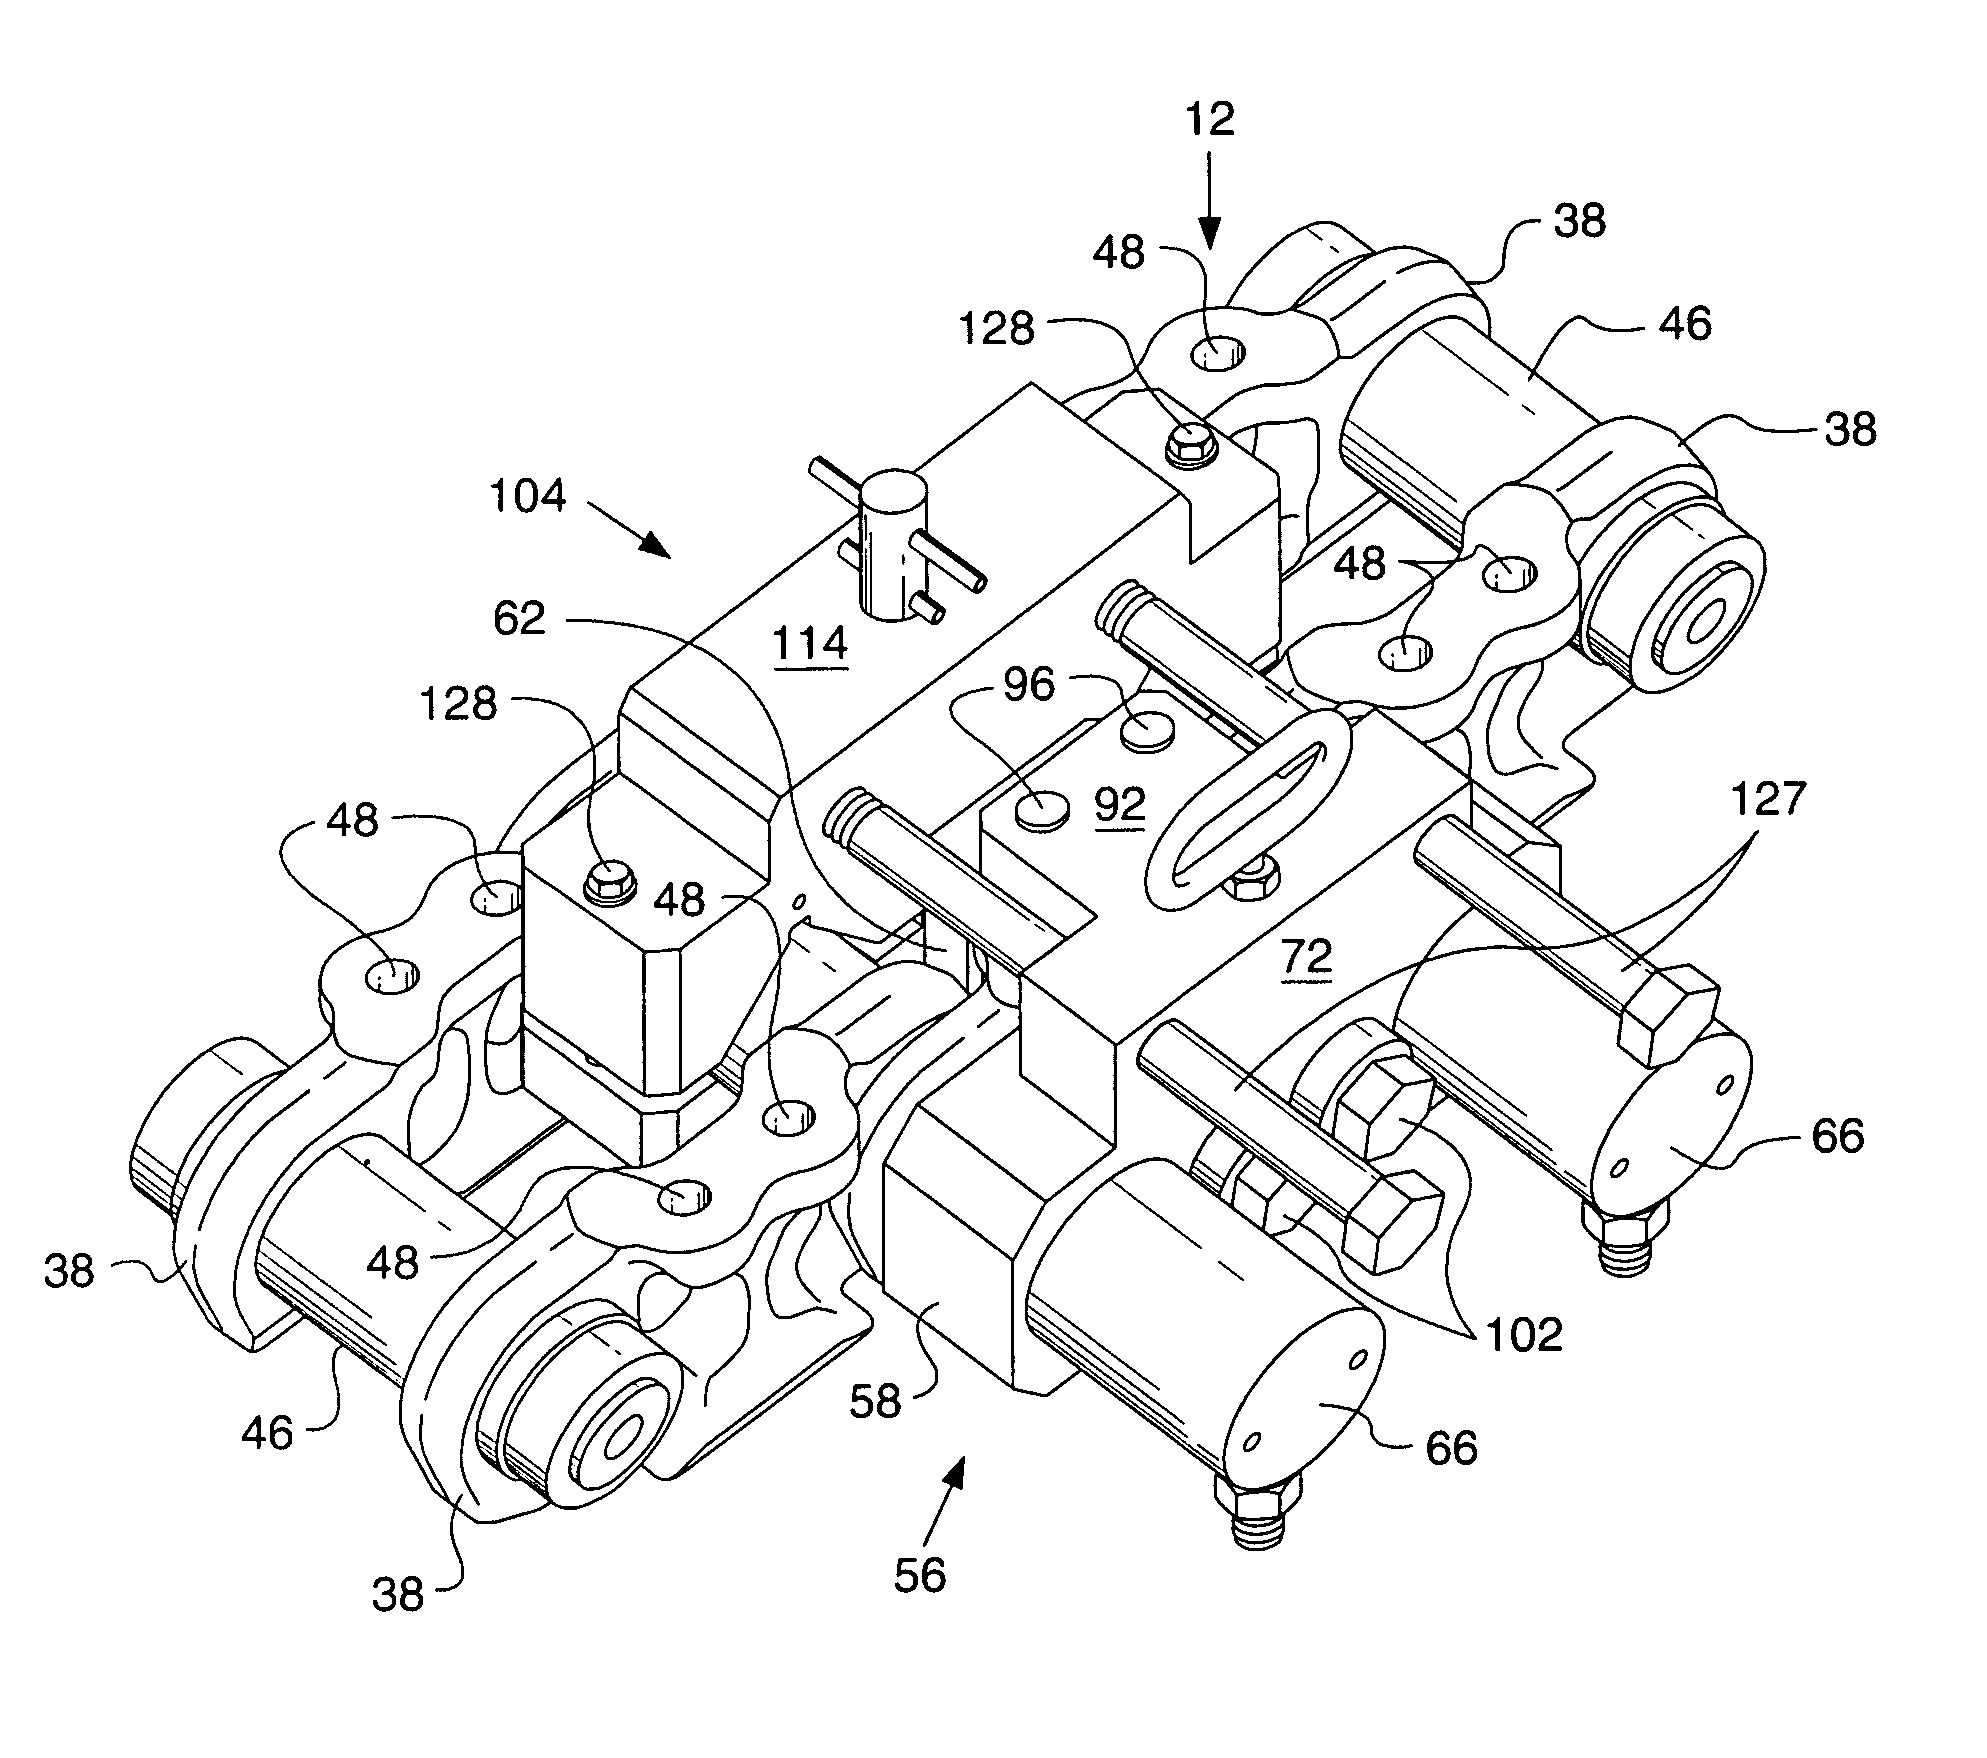 Method and apparatus for disassembling a track chain